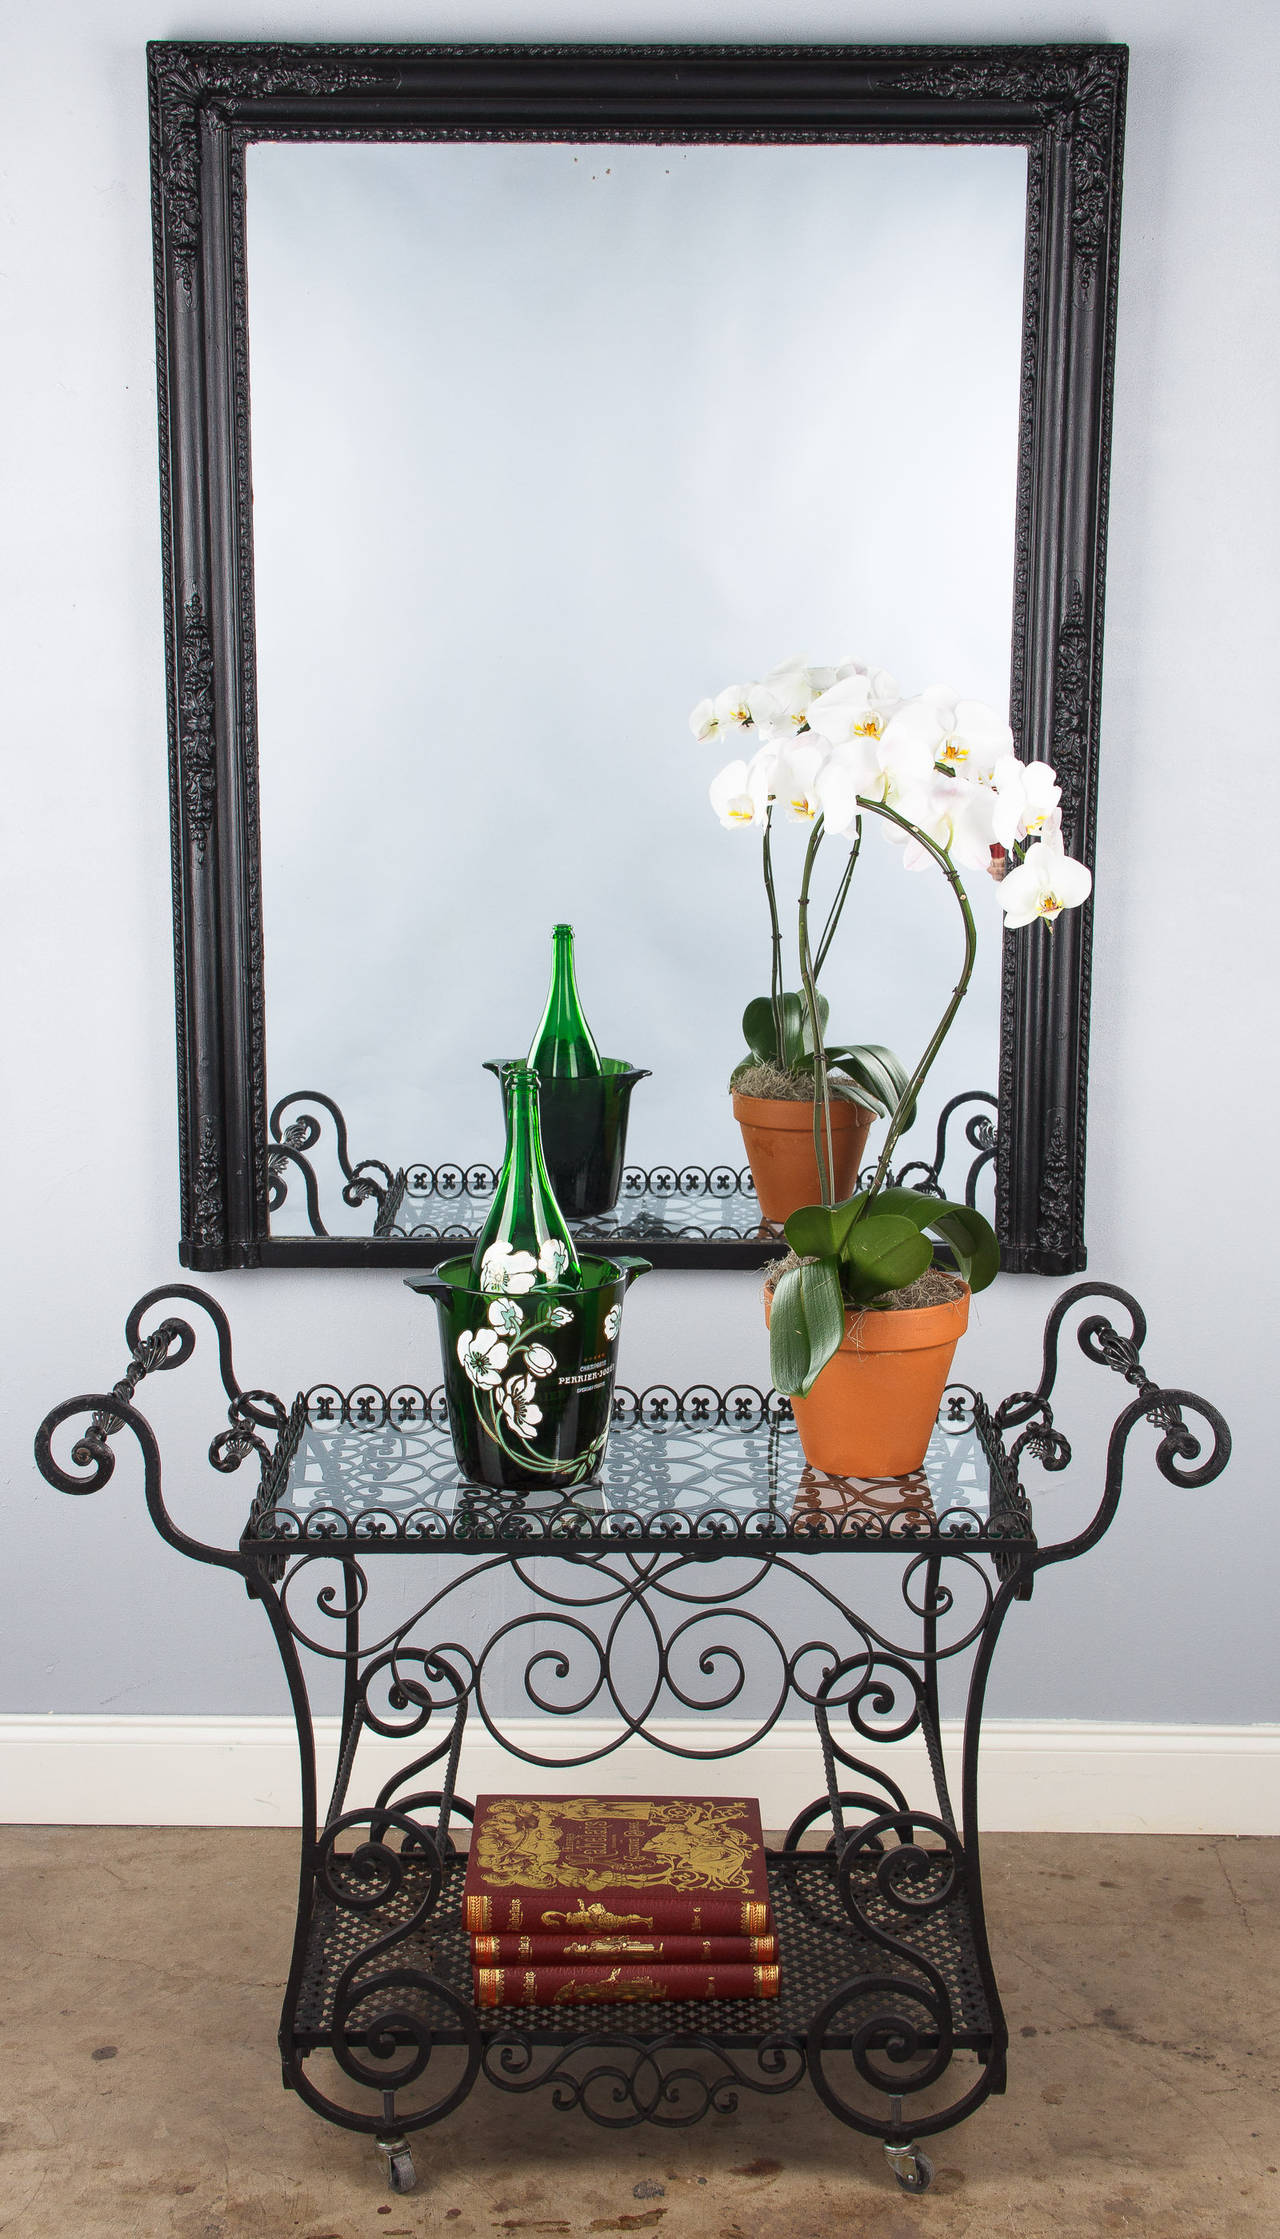 A Napoleon III Period mirror from the Provence region of France painted black with flower and foliage moldings on its frame with a rope motif trimming the edge.